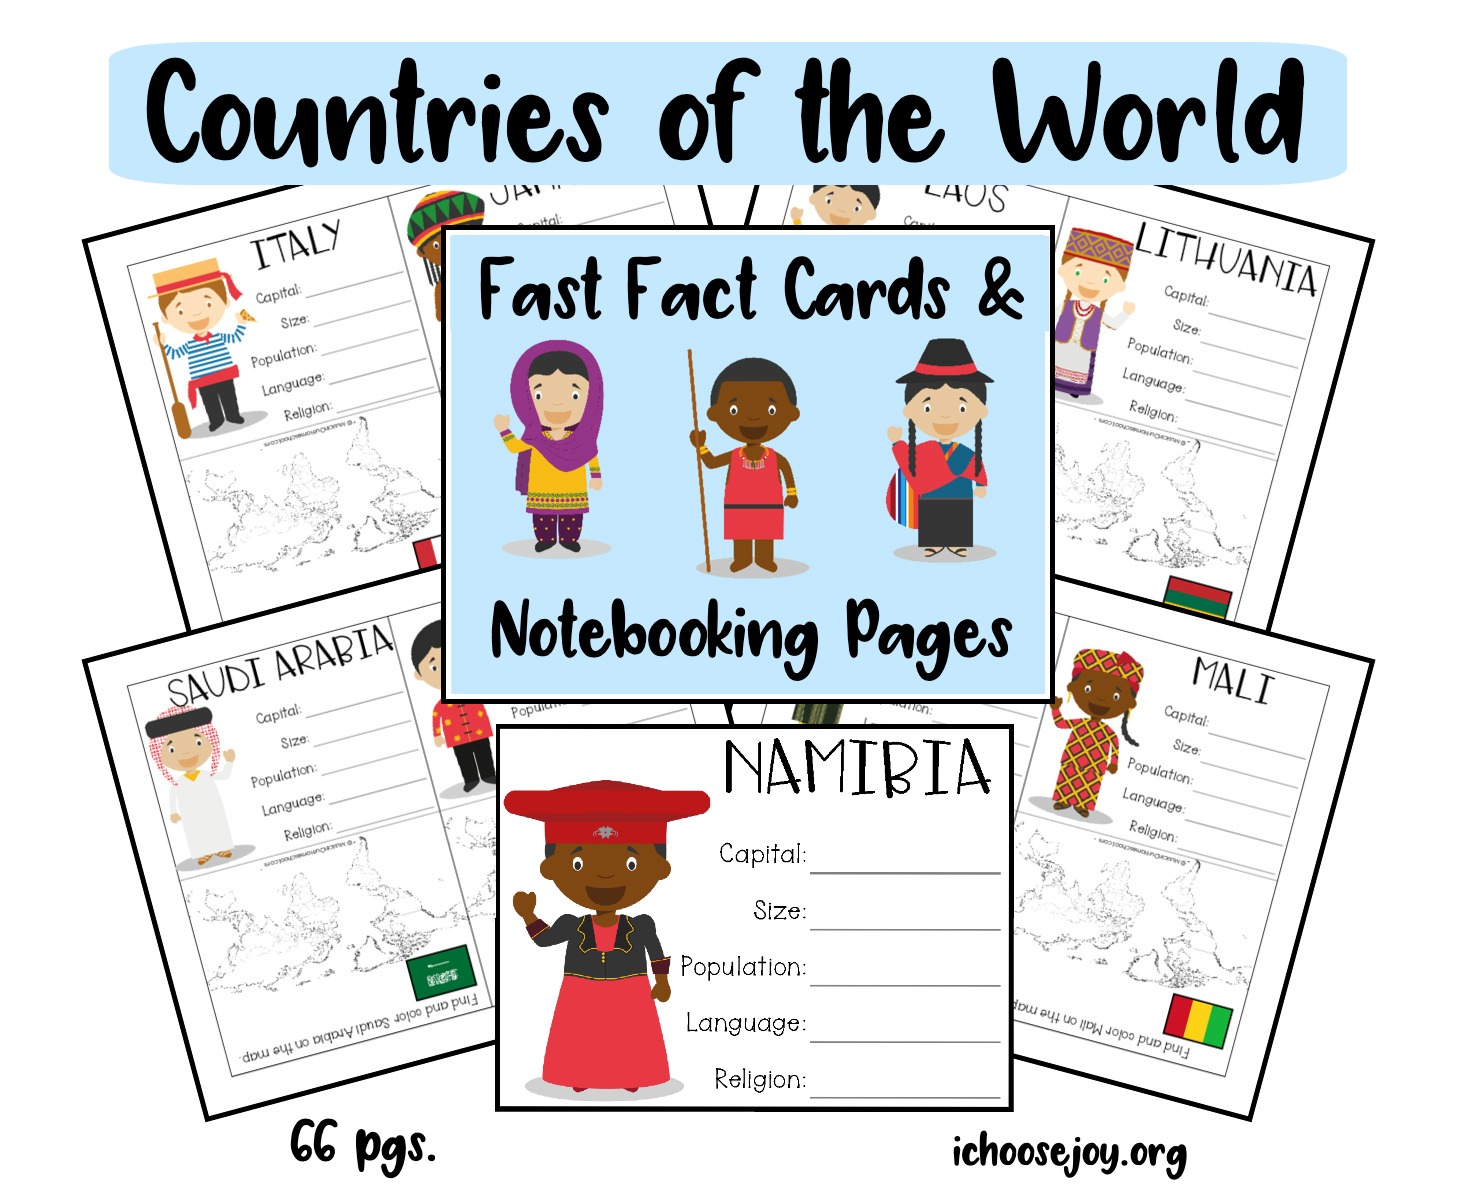 Countries of the World Fast Fact Cards & Notebooking Pages